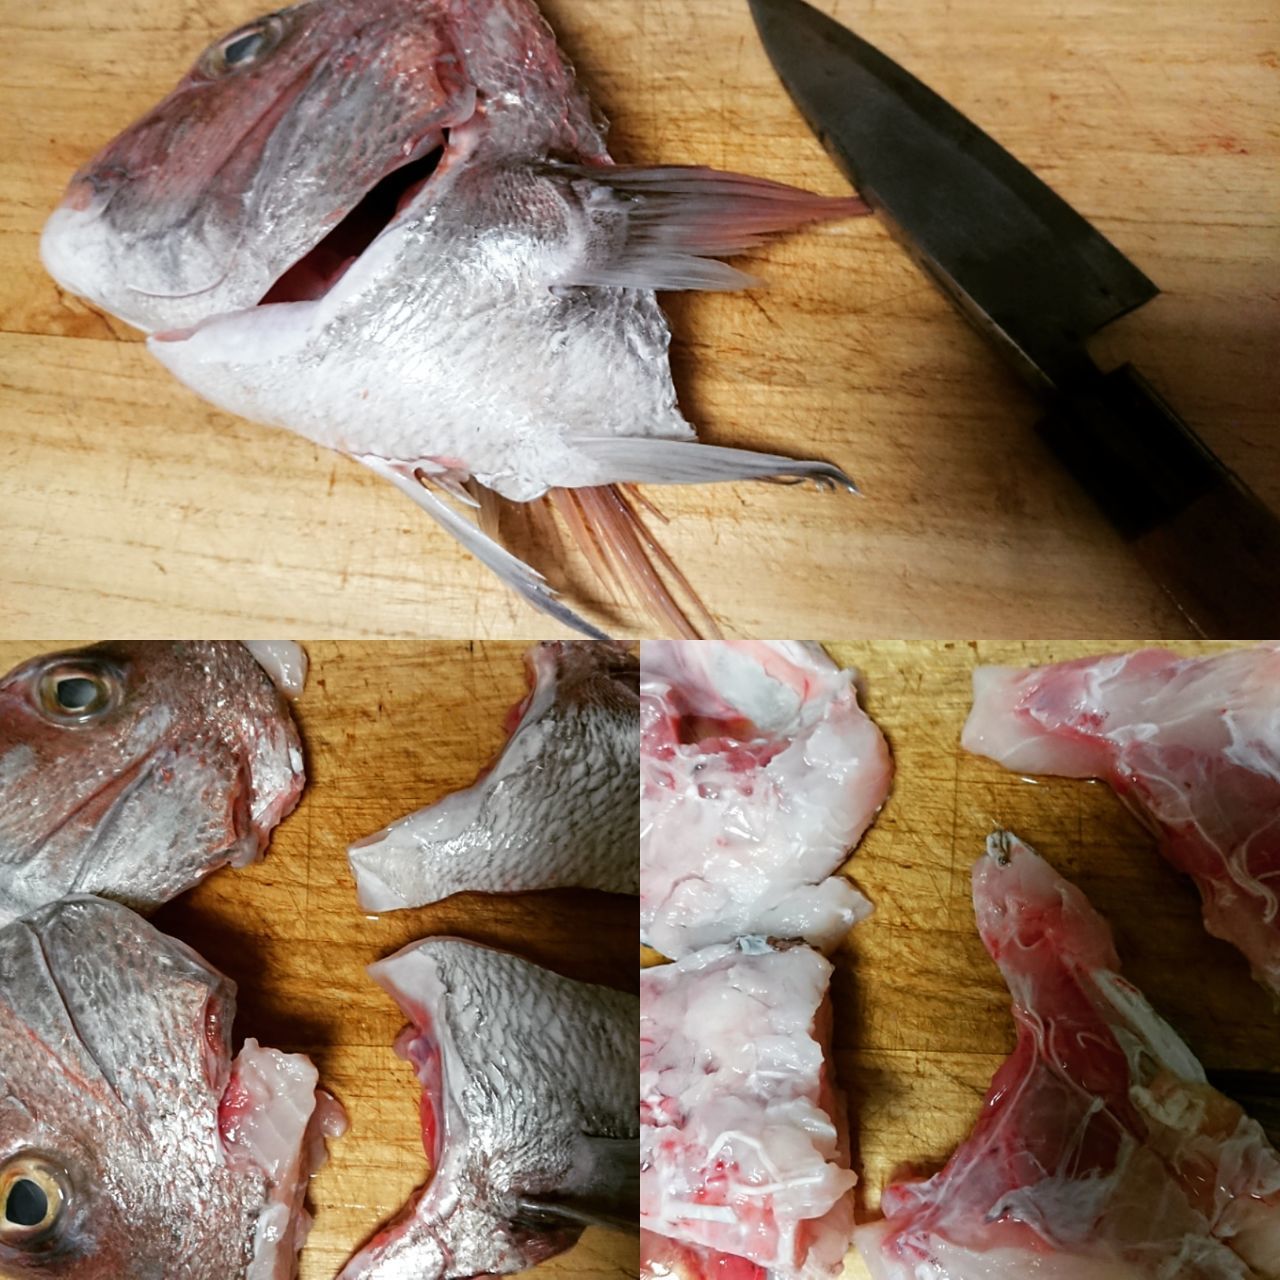 HIGH ANGLE VIEW OF DEAD FISH ON TABLE